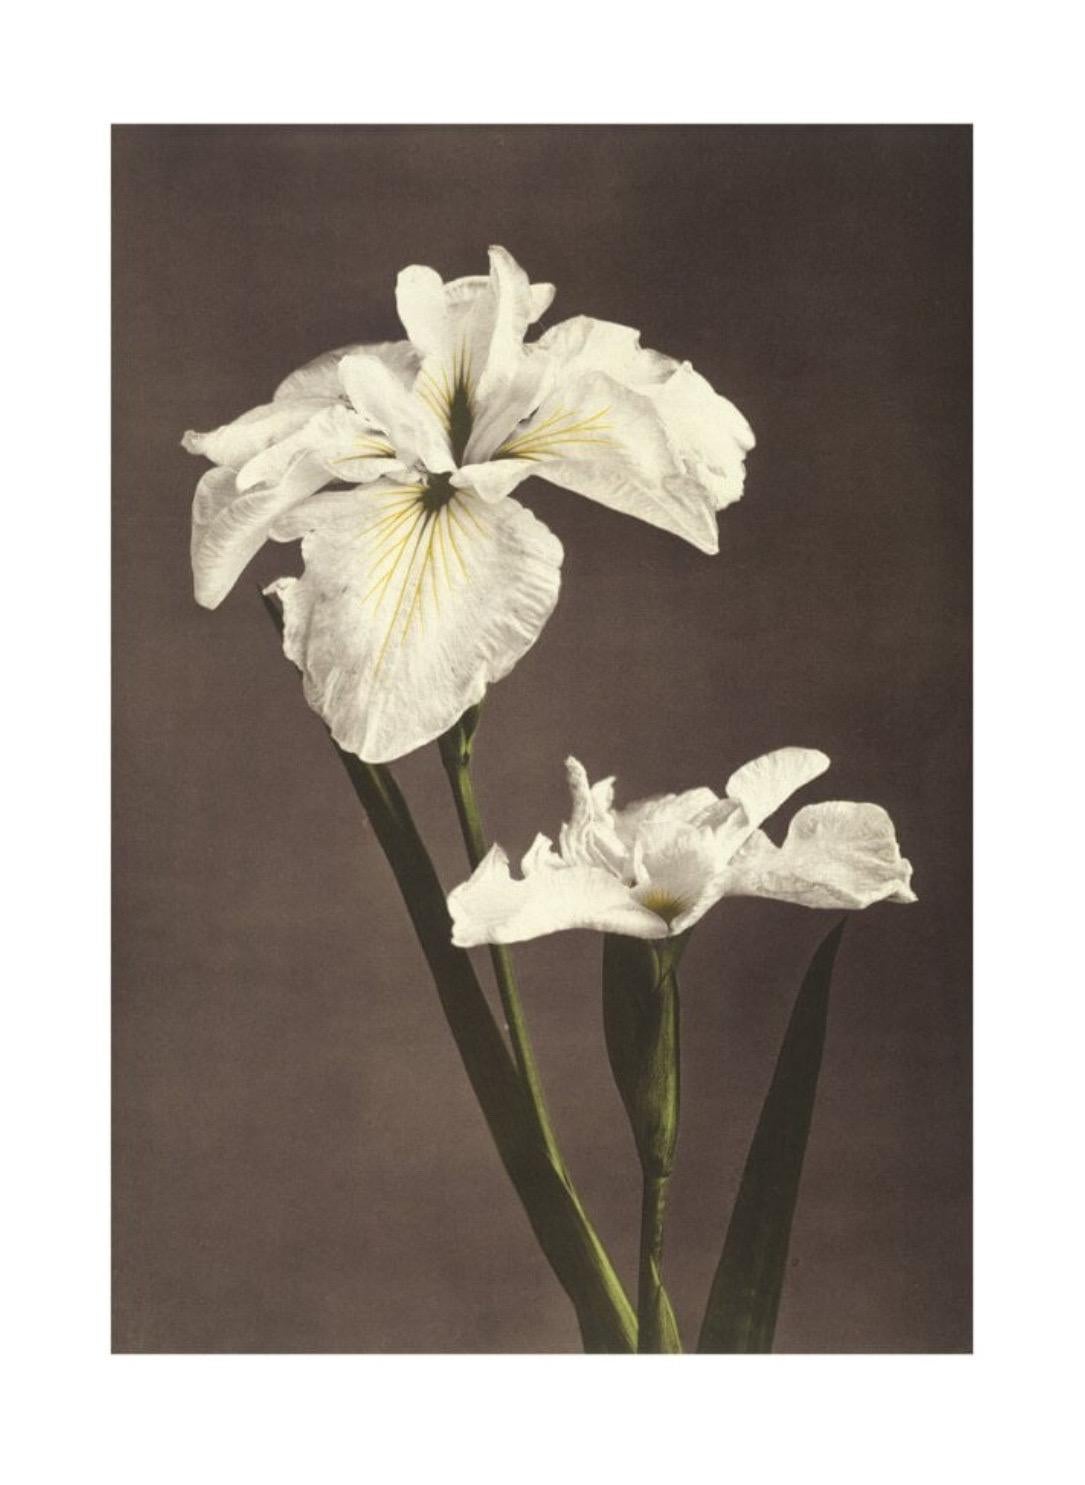 Ogawa Kazumasa, Iris Kæmpferi, from Some Japanese Flowers

Giclee print on Matt 250gsm conservation paper made in Germany from acid and chlorine free wood pulp 

Paper size: 100 x 76 cm
Image size: 80 x 56 cm 

This print comes with a border